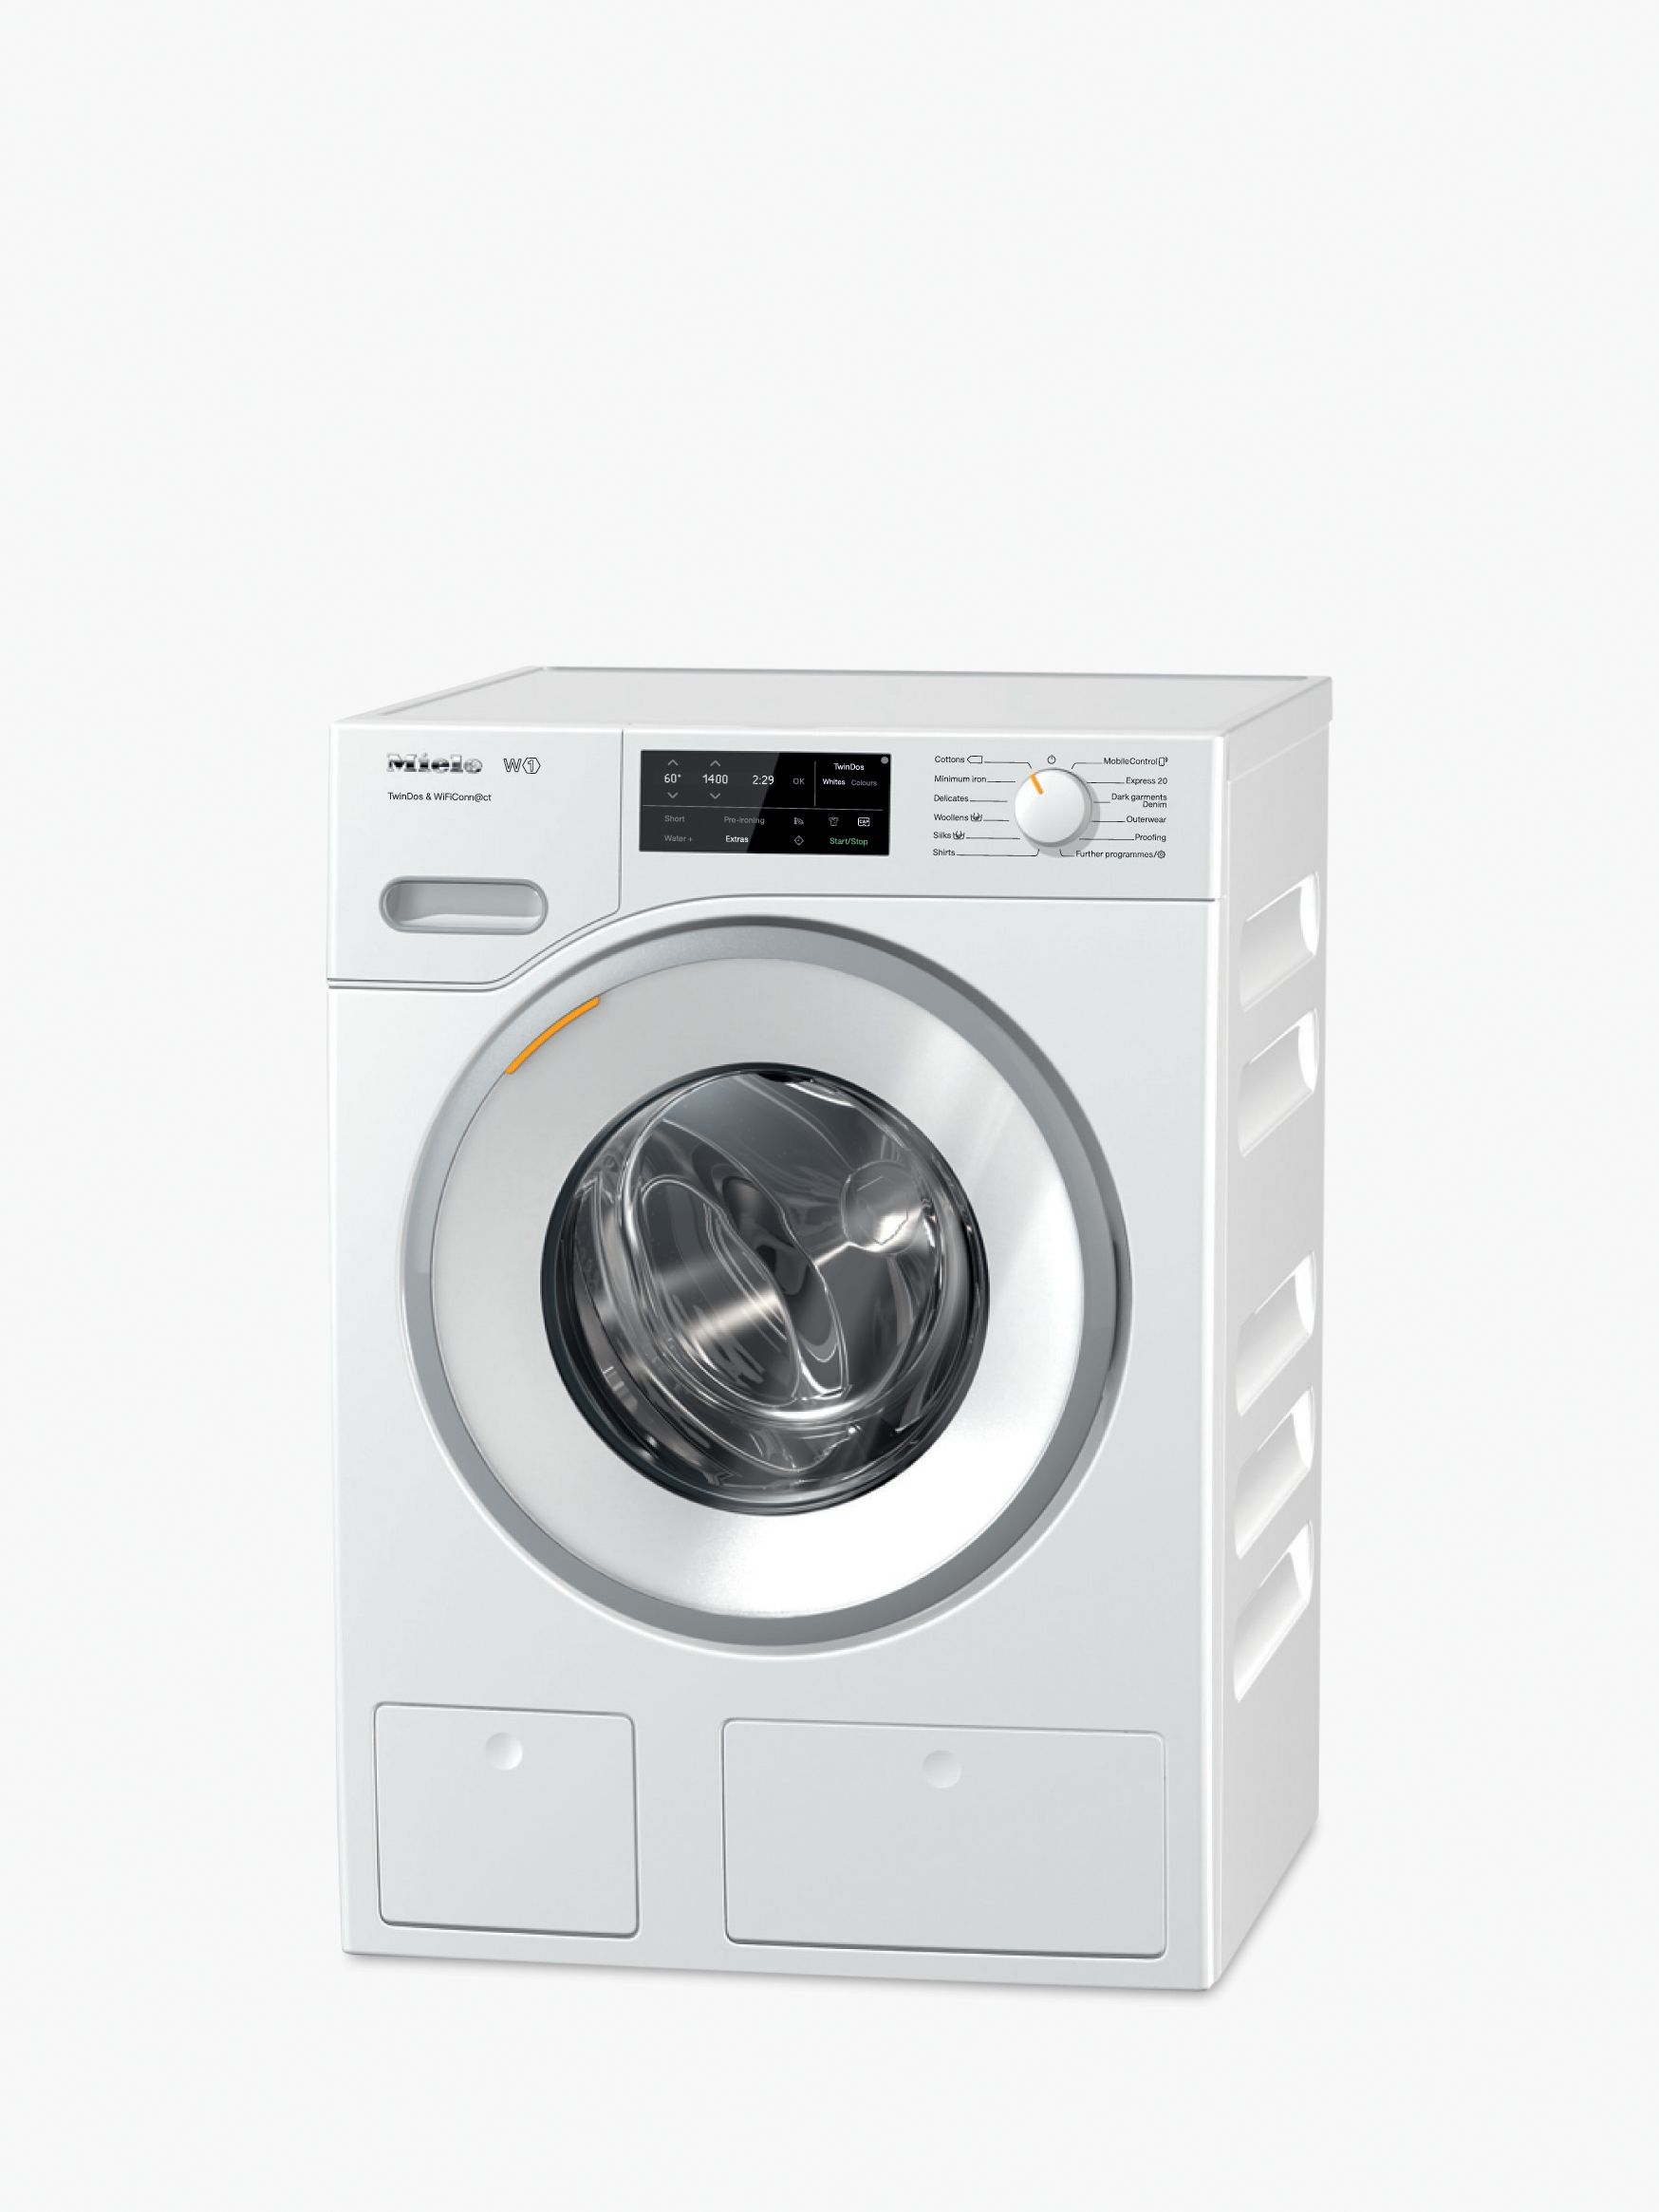 Miele WWE660 TwinDos Freestanding Washing Machine, 8kg Load, A+++ Energy Rating, 1400rpm Spin, White